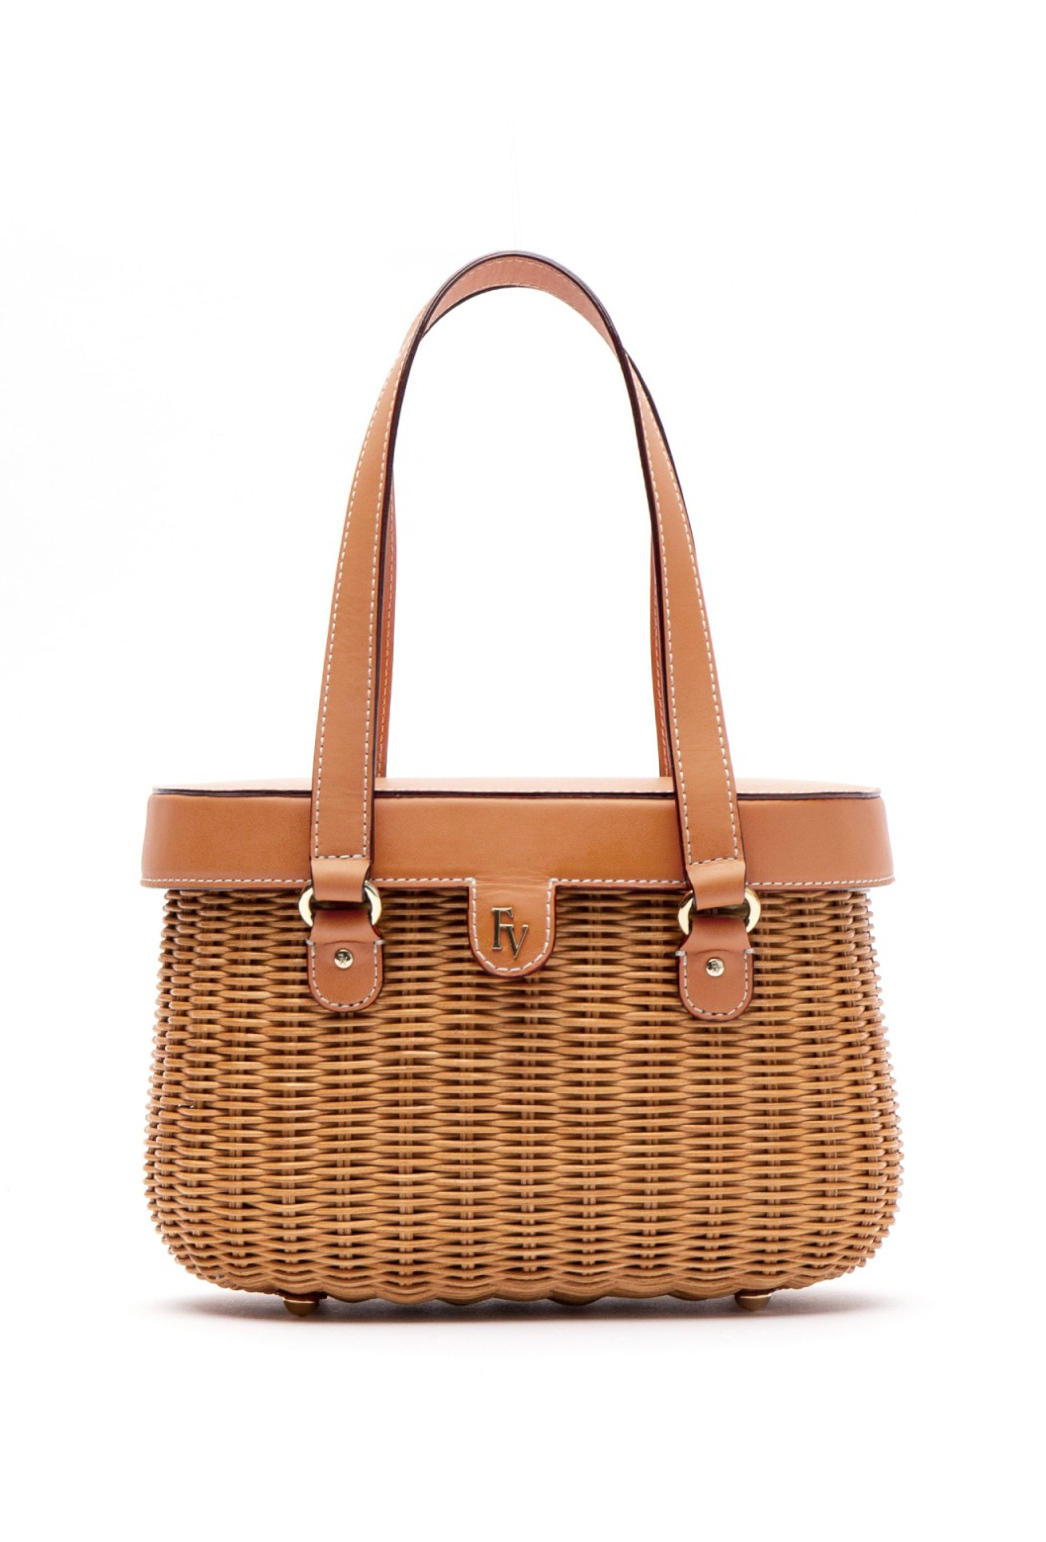 The Daily Hunt: Wicker Shell Clutch of My Dreams and More! - Katie ...